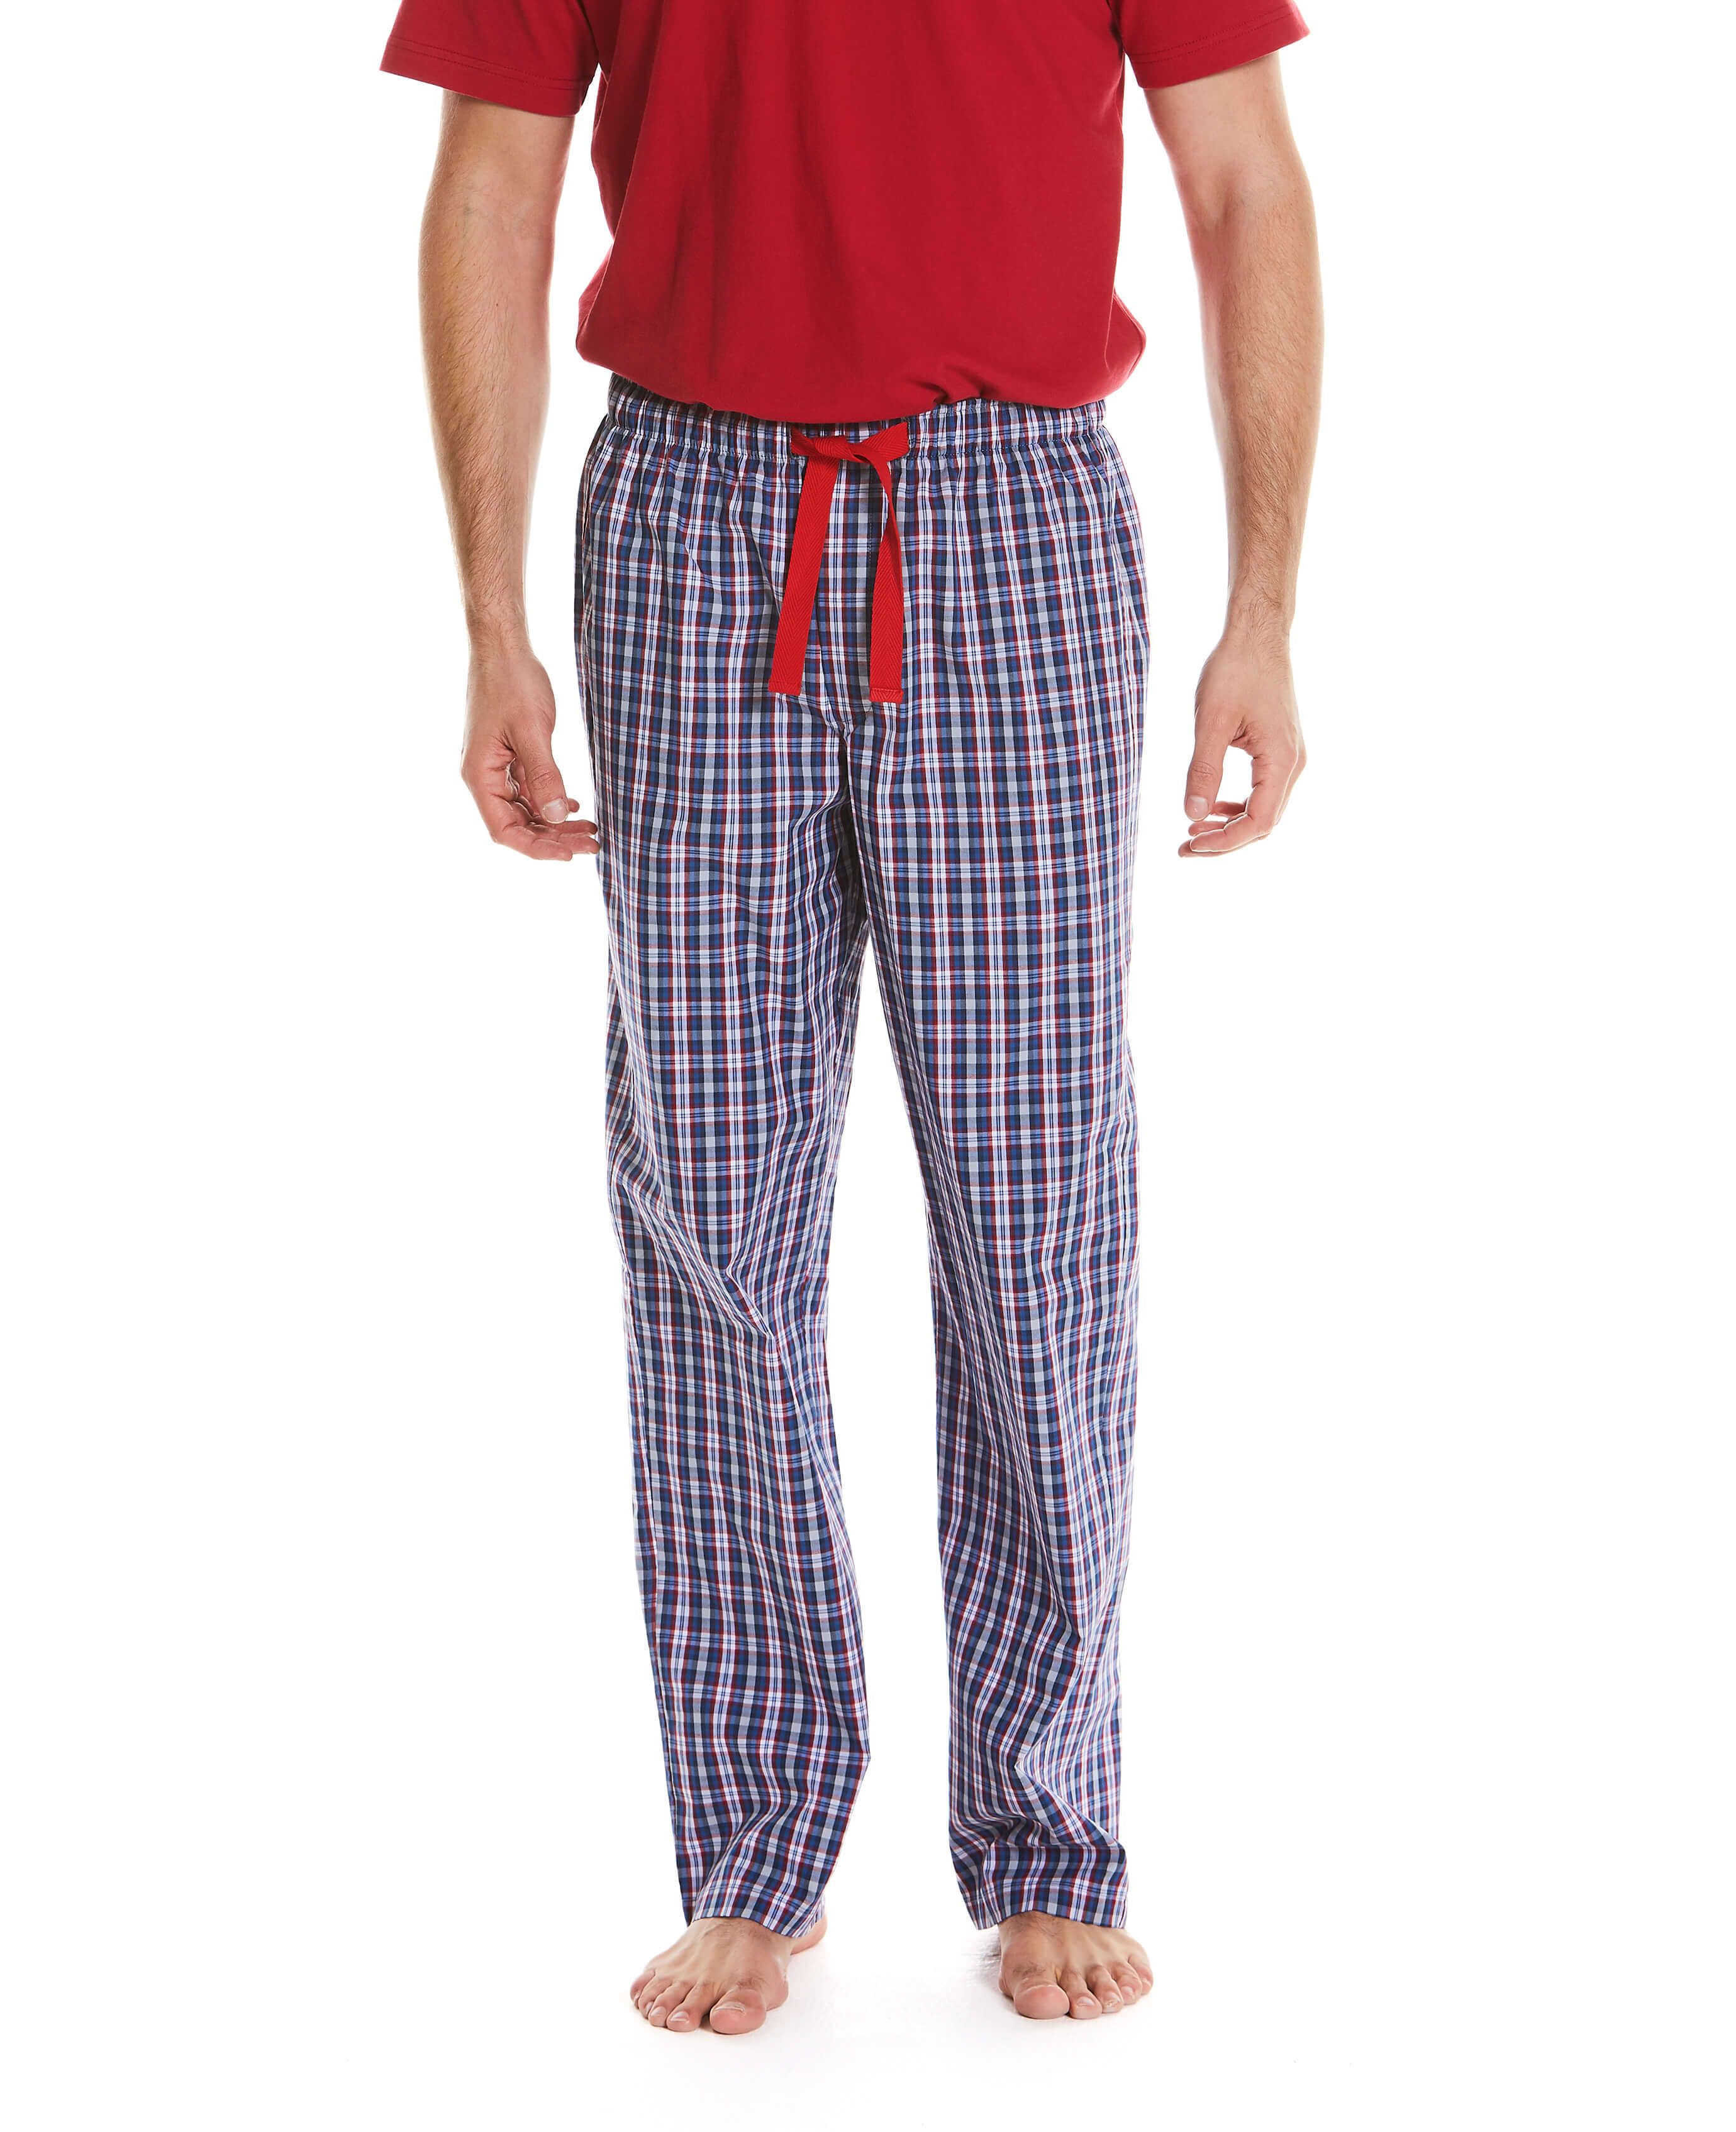 Men's Navy, Blue, Red And White Checked Lounge Pants | Savile Row Co